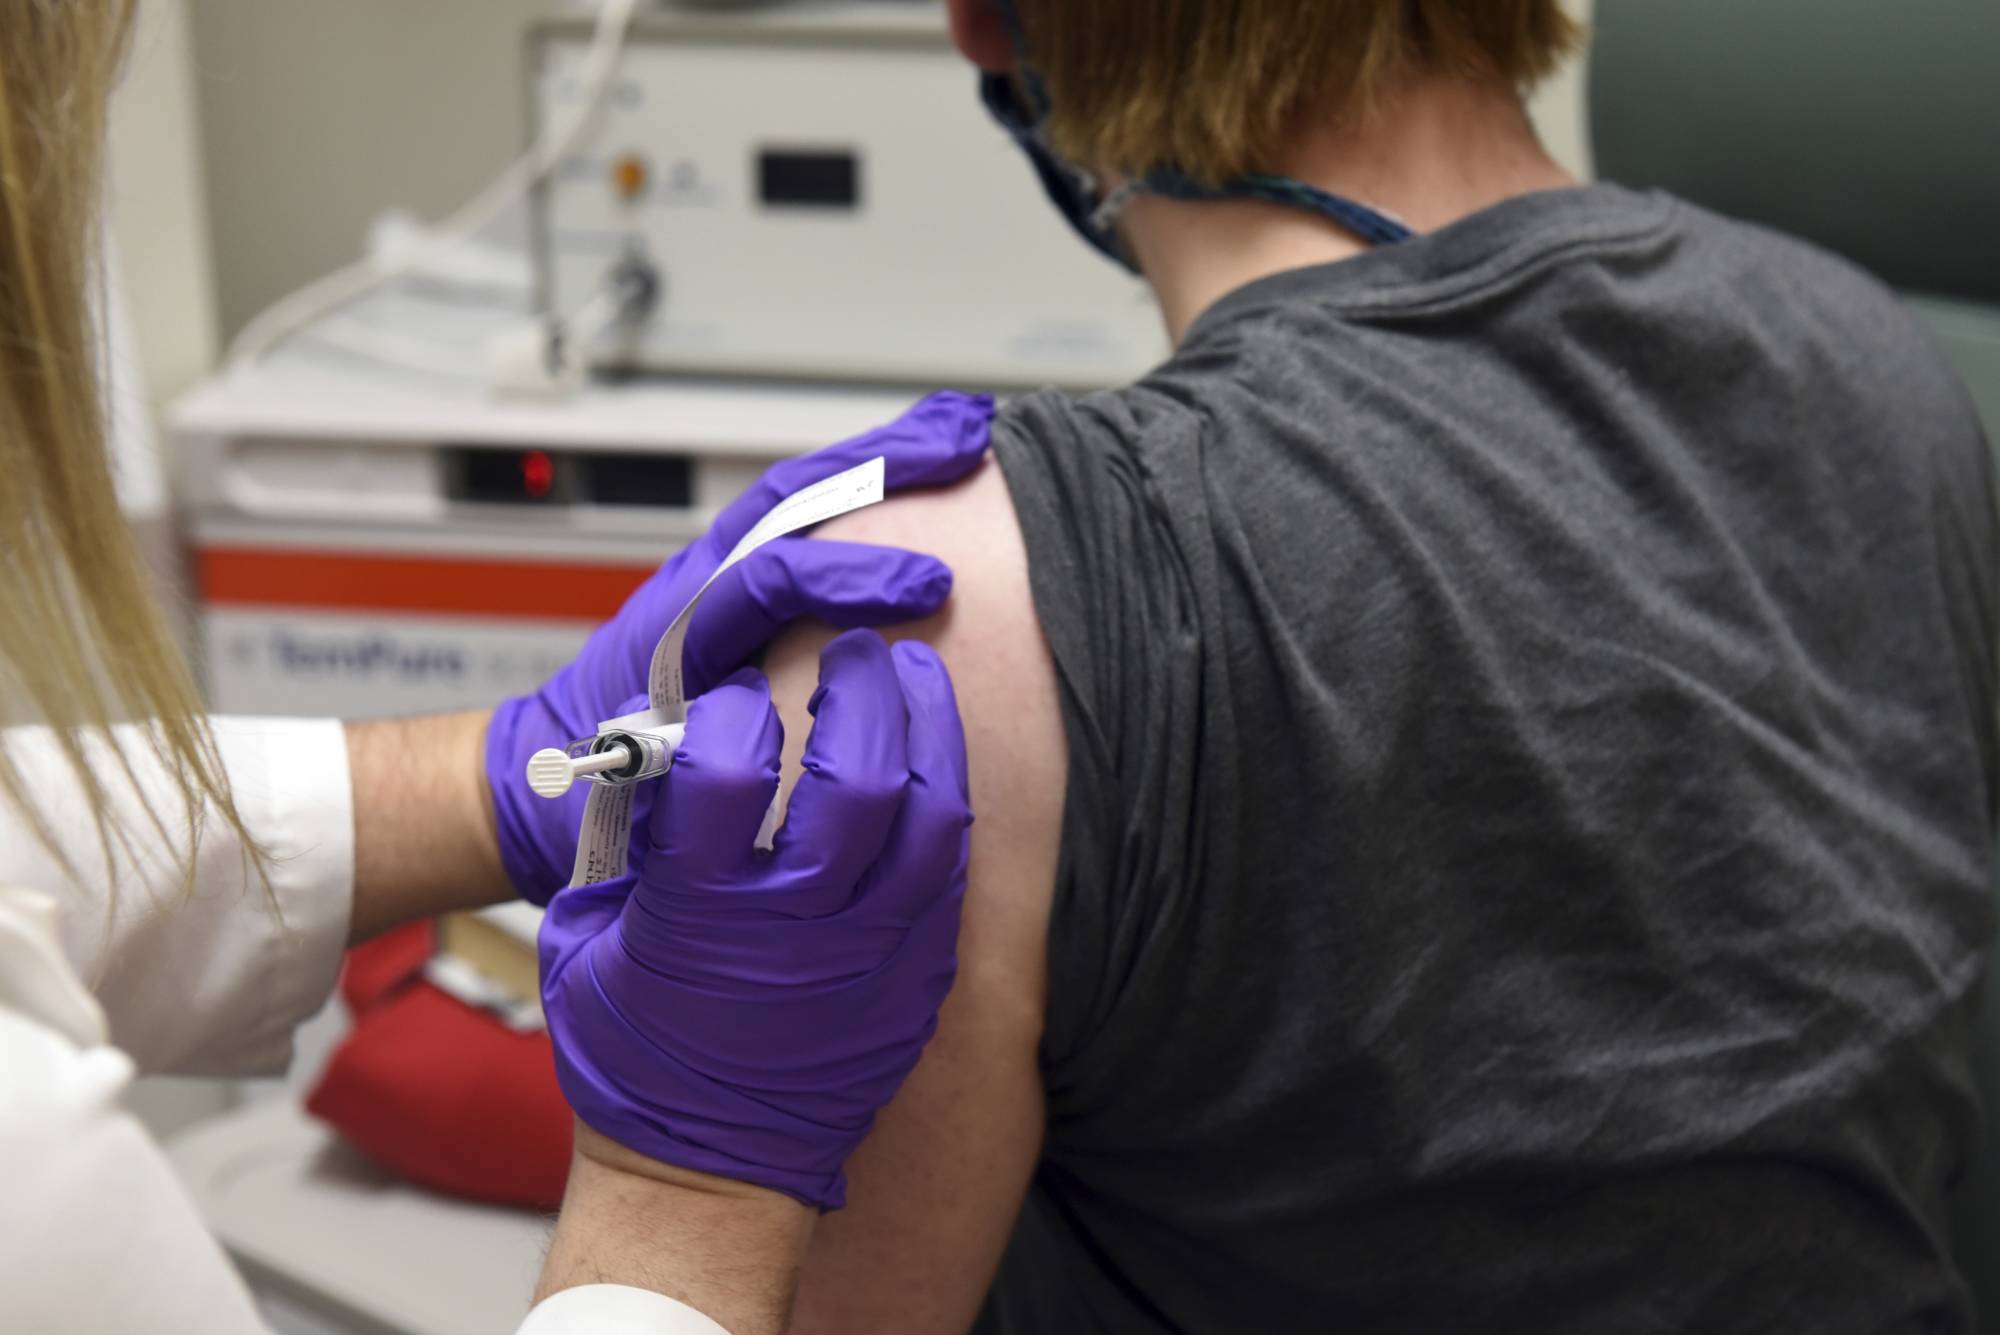 A person enrolled in Pfizer's COVID-19 vaccine clinical trial is vaccinated at the University of Maryland School of Medicine in Baltimore in May. | UNIVERSITY OF MARYLAND SCHOOL OF MEDICINE / VIA AP